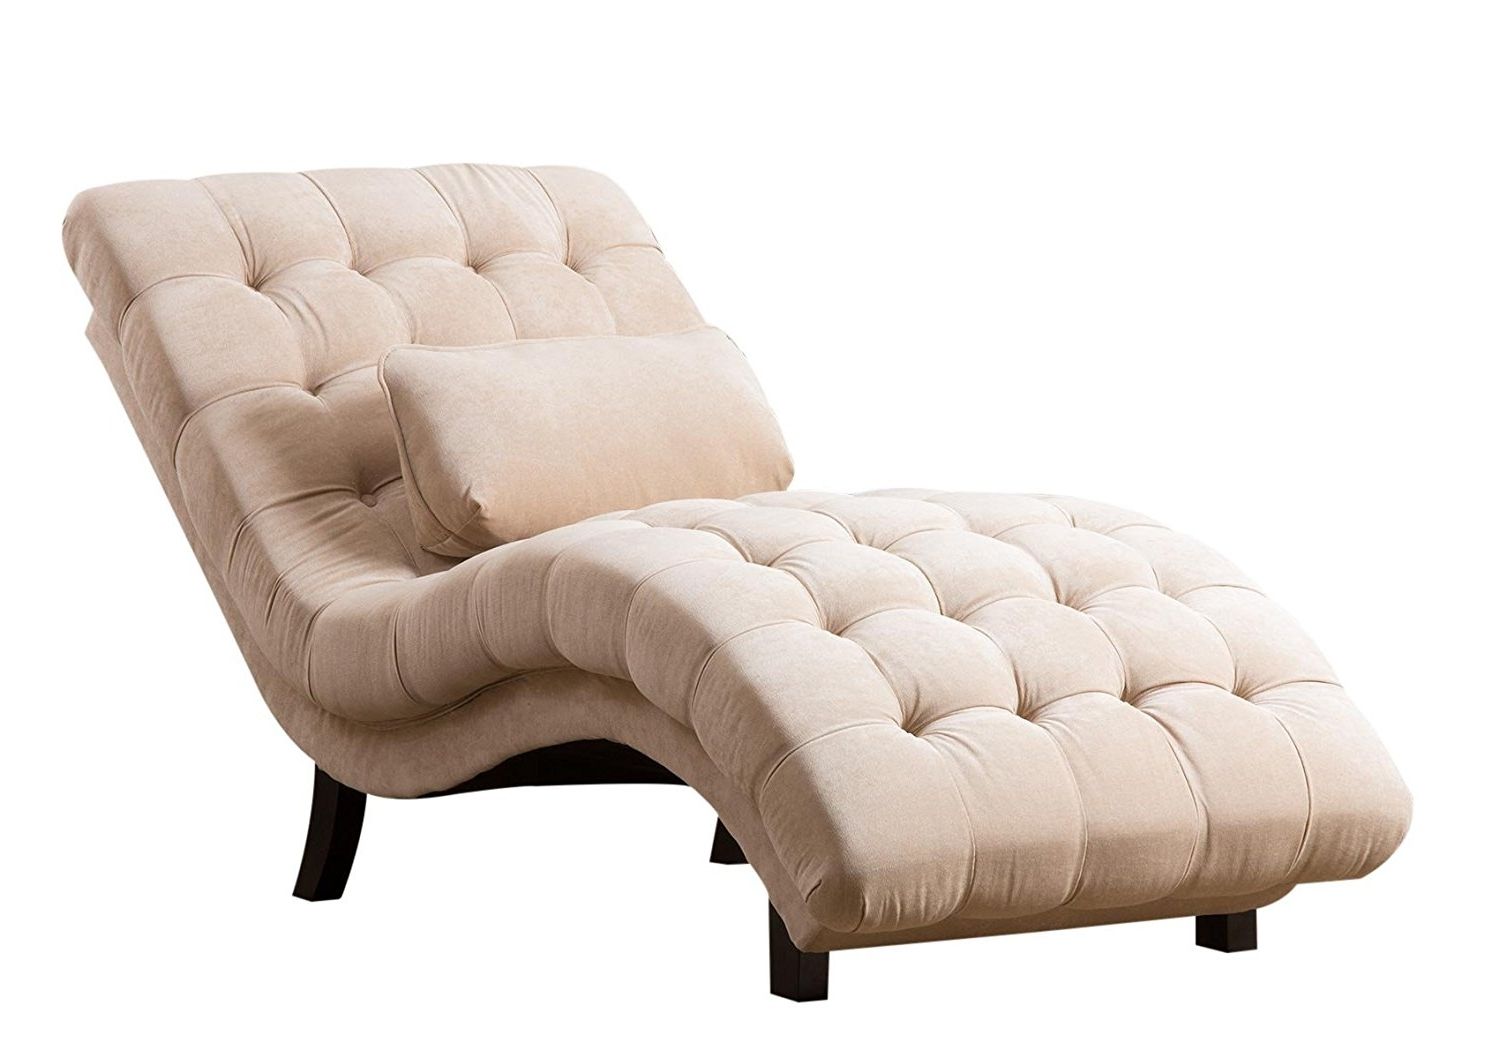 Well Known Accent Chaises Throughout Amazon: Abbyson Carmen Cream Fabric Chaise: Home & Kitchen (View 12 of 15)